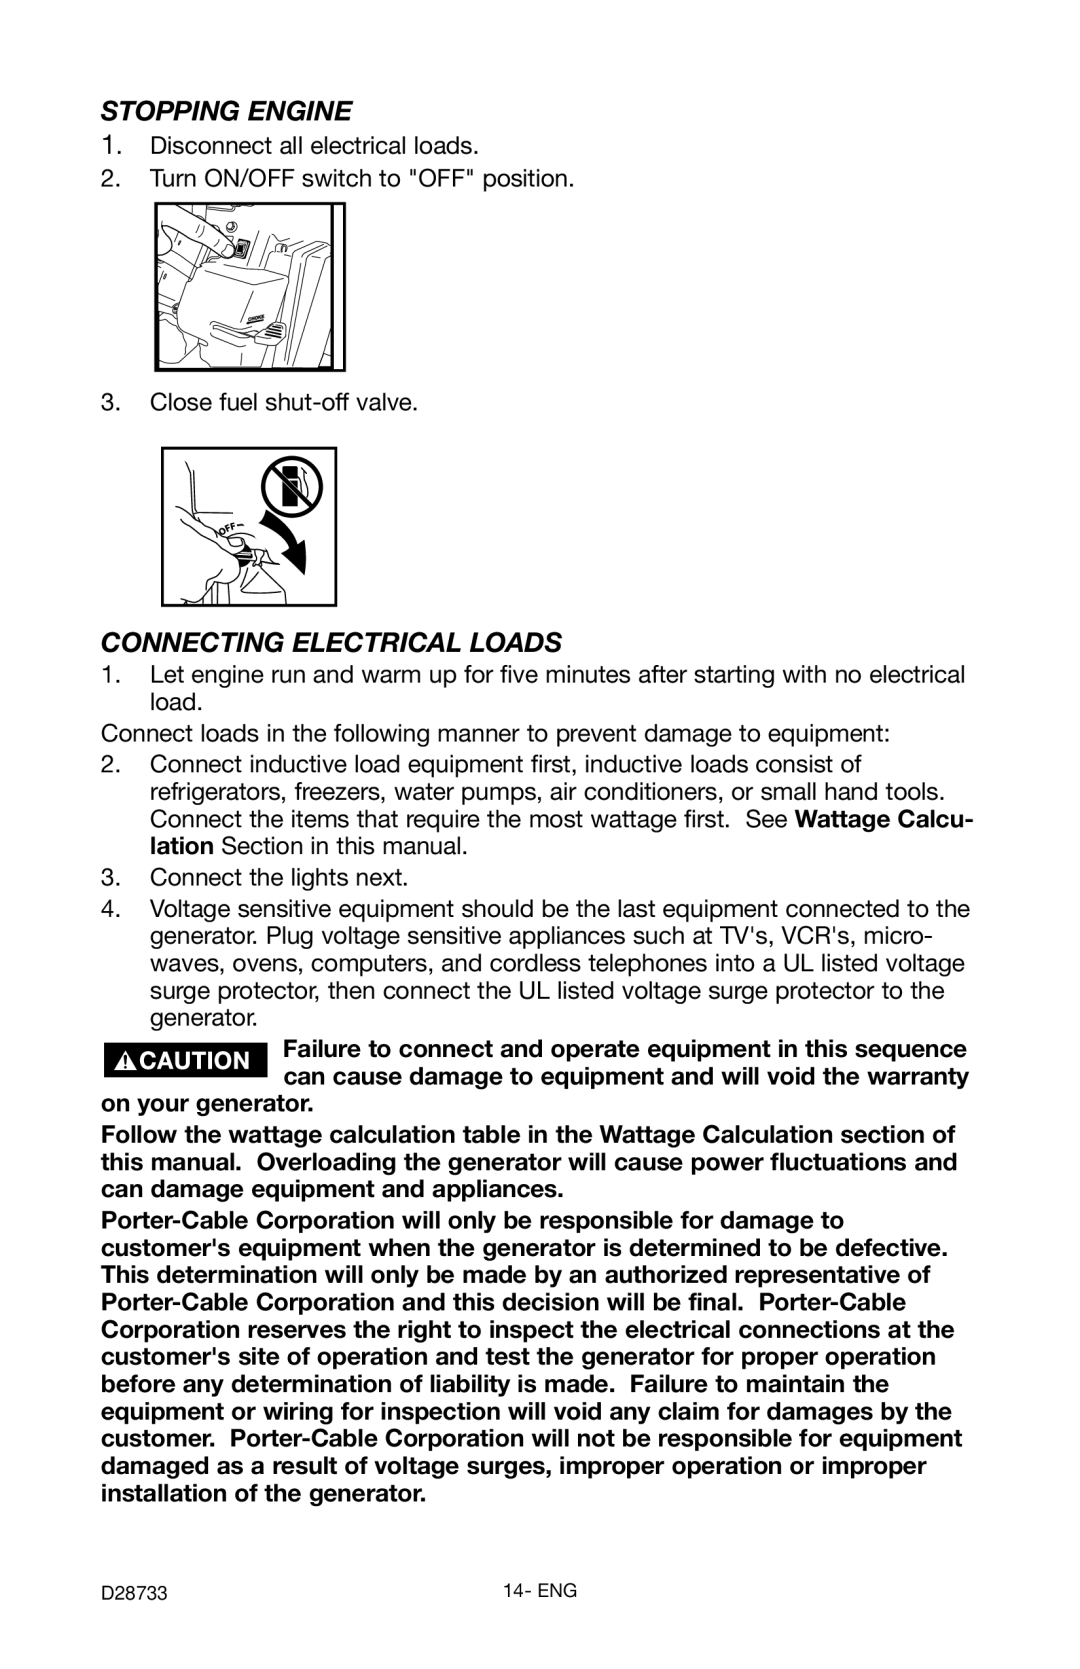 Porter-Cable PGN350, D28733-034-0 instruction manual Stopping Engine, Connecting Electrical Loads 